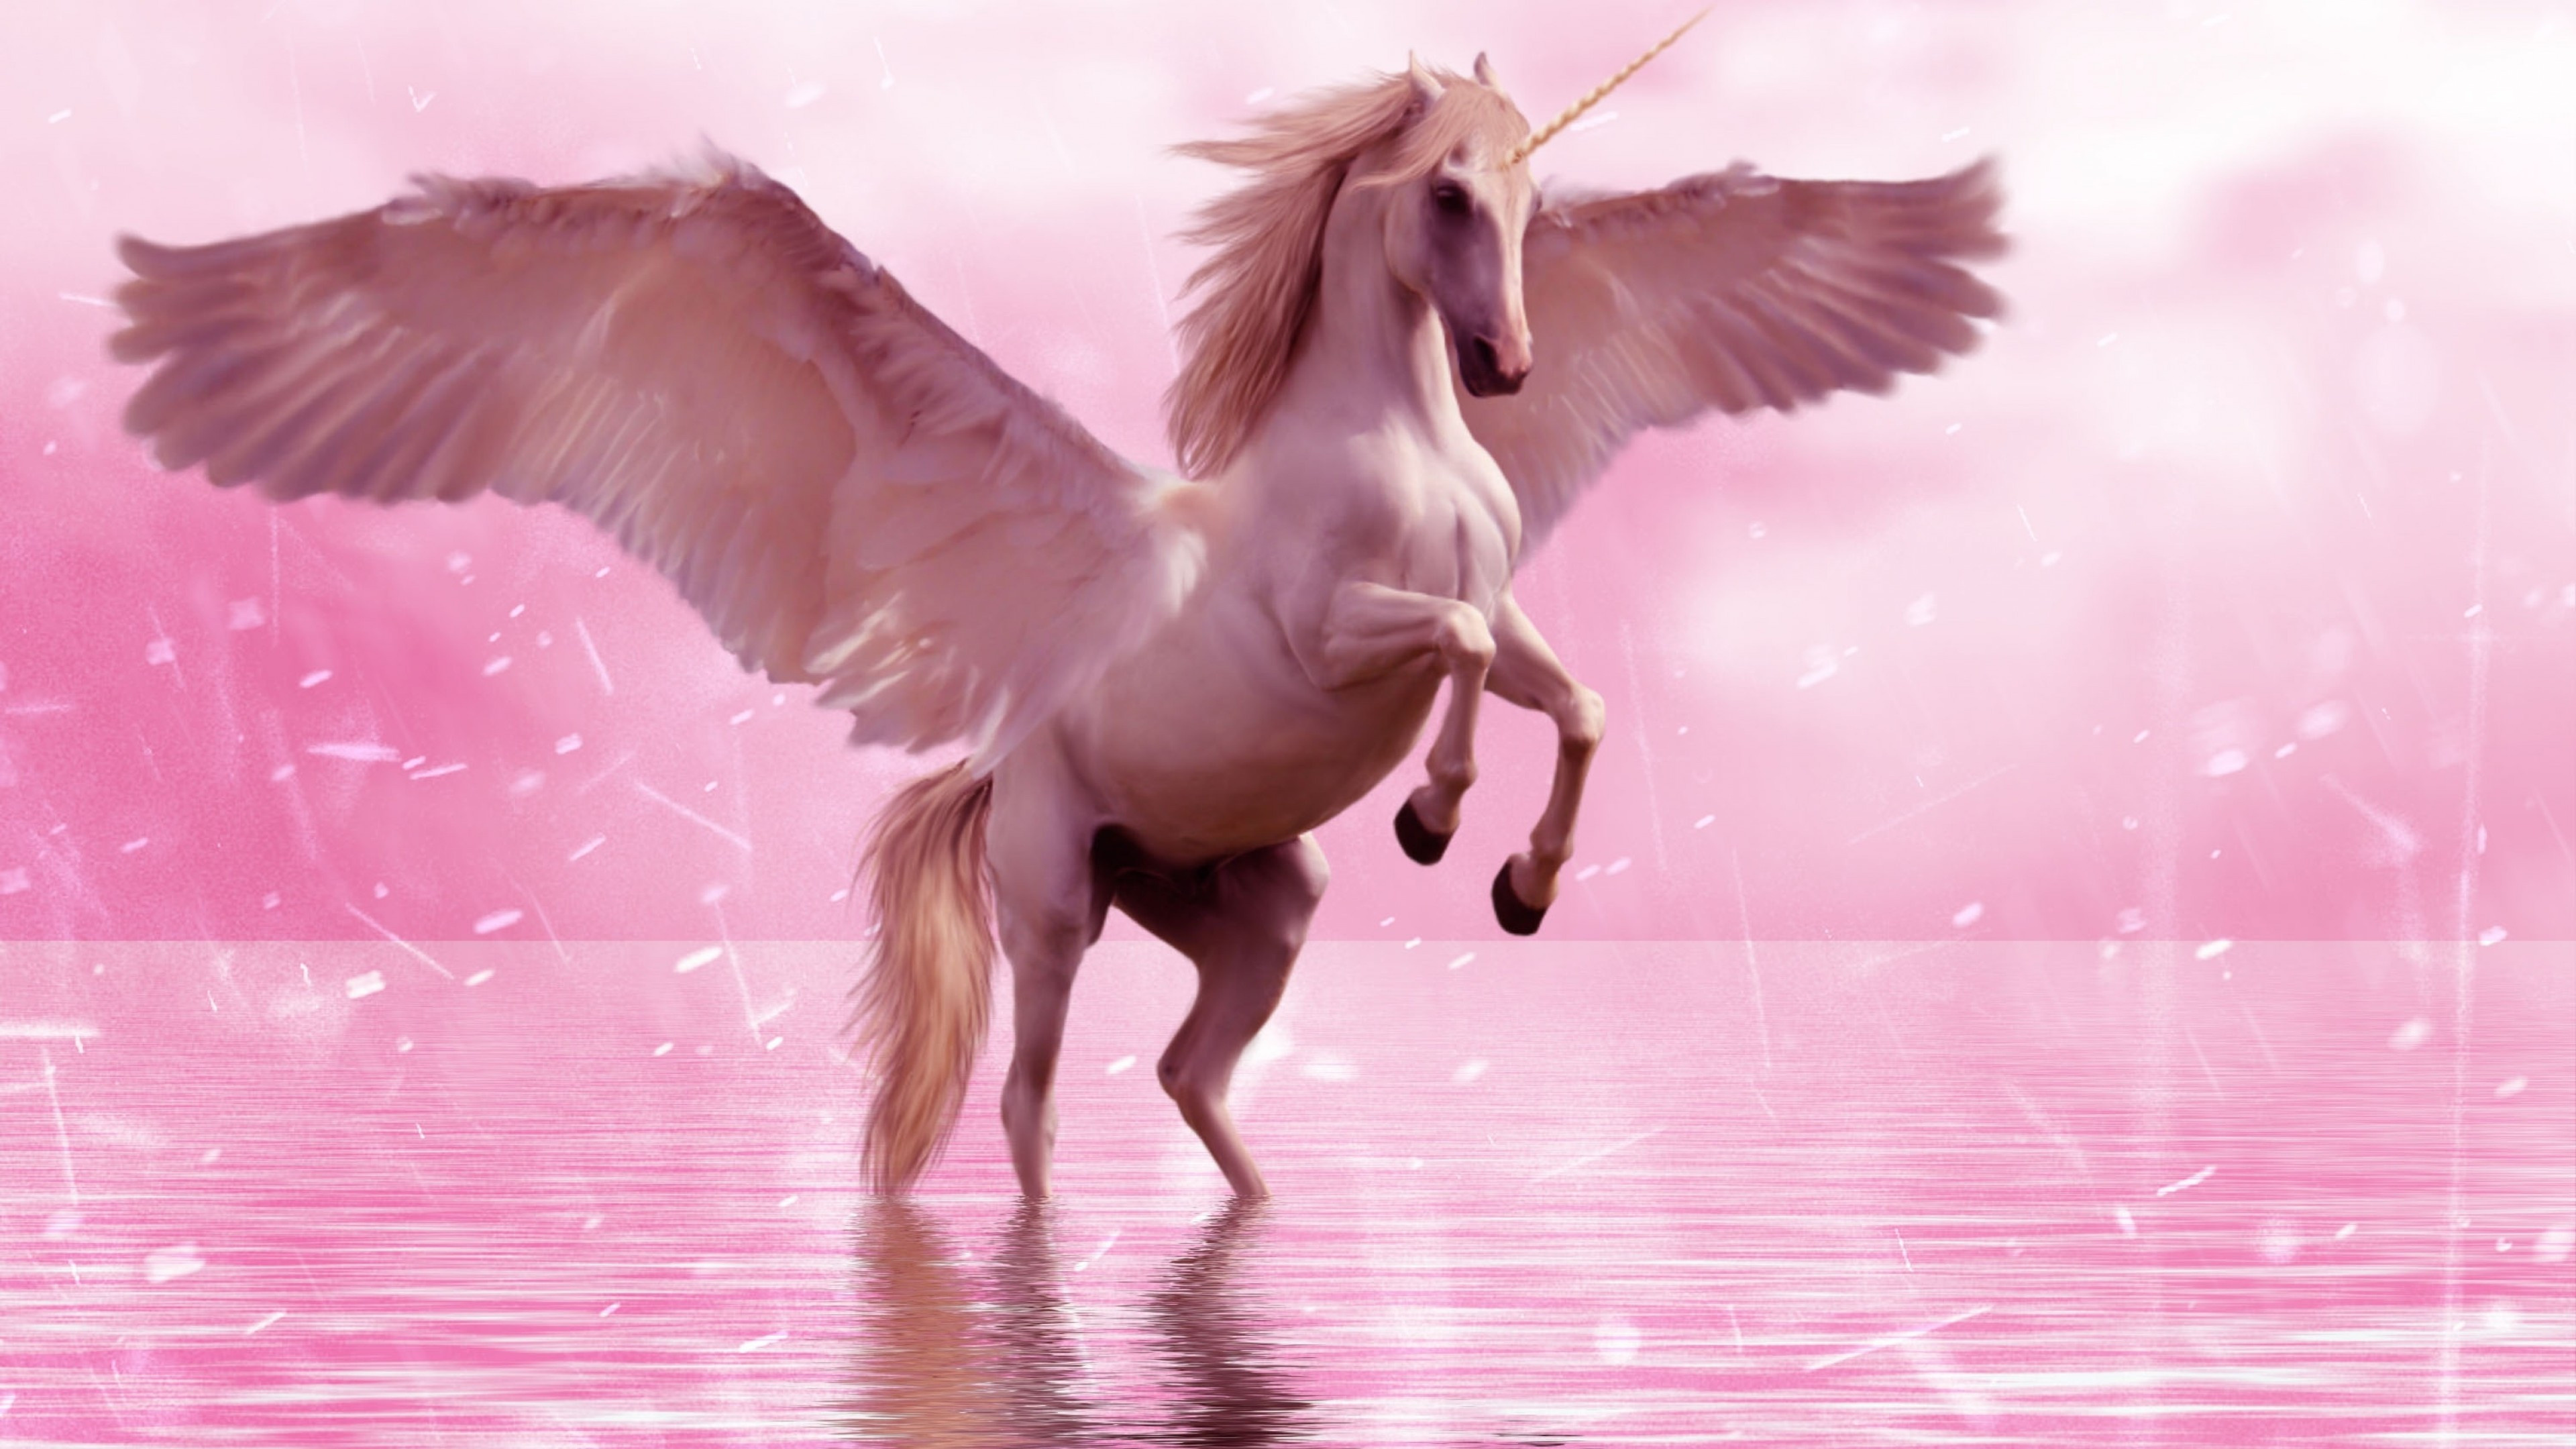 Pegasus unicorn with wings, UHD TV wallpapers, Horse creature, Mythical beauty, 3840x2160 4K Desktop